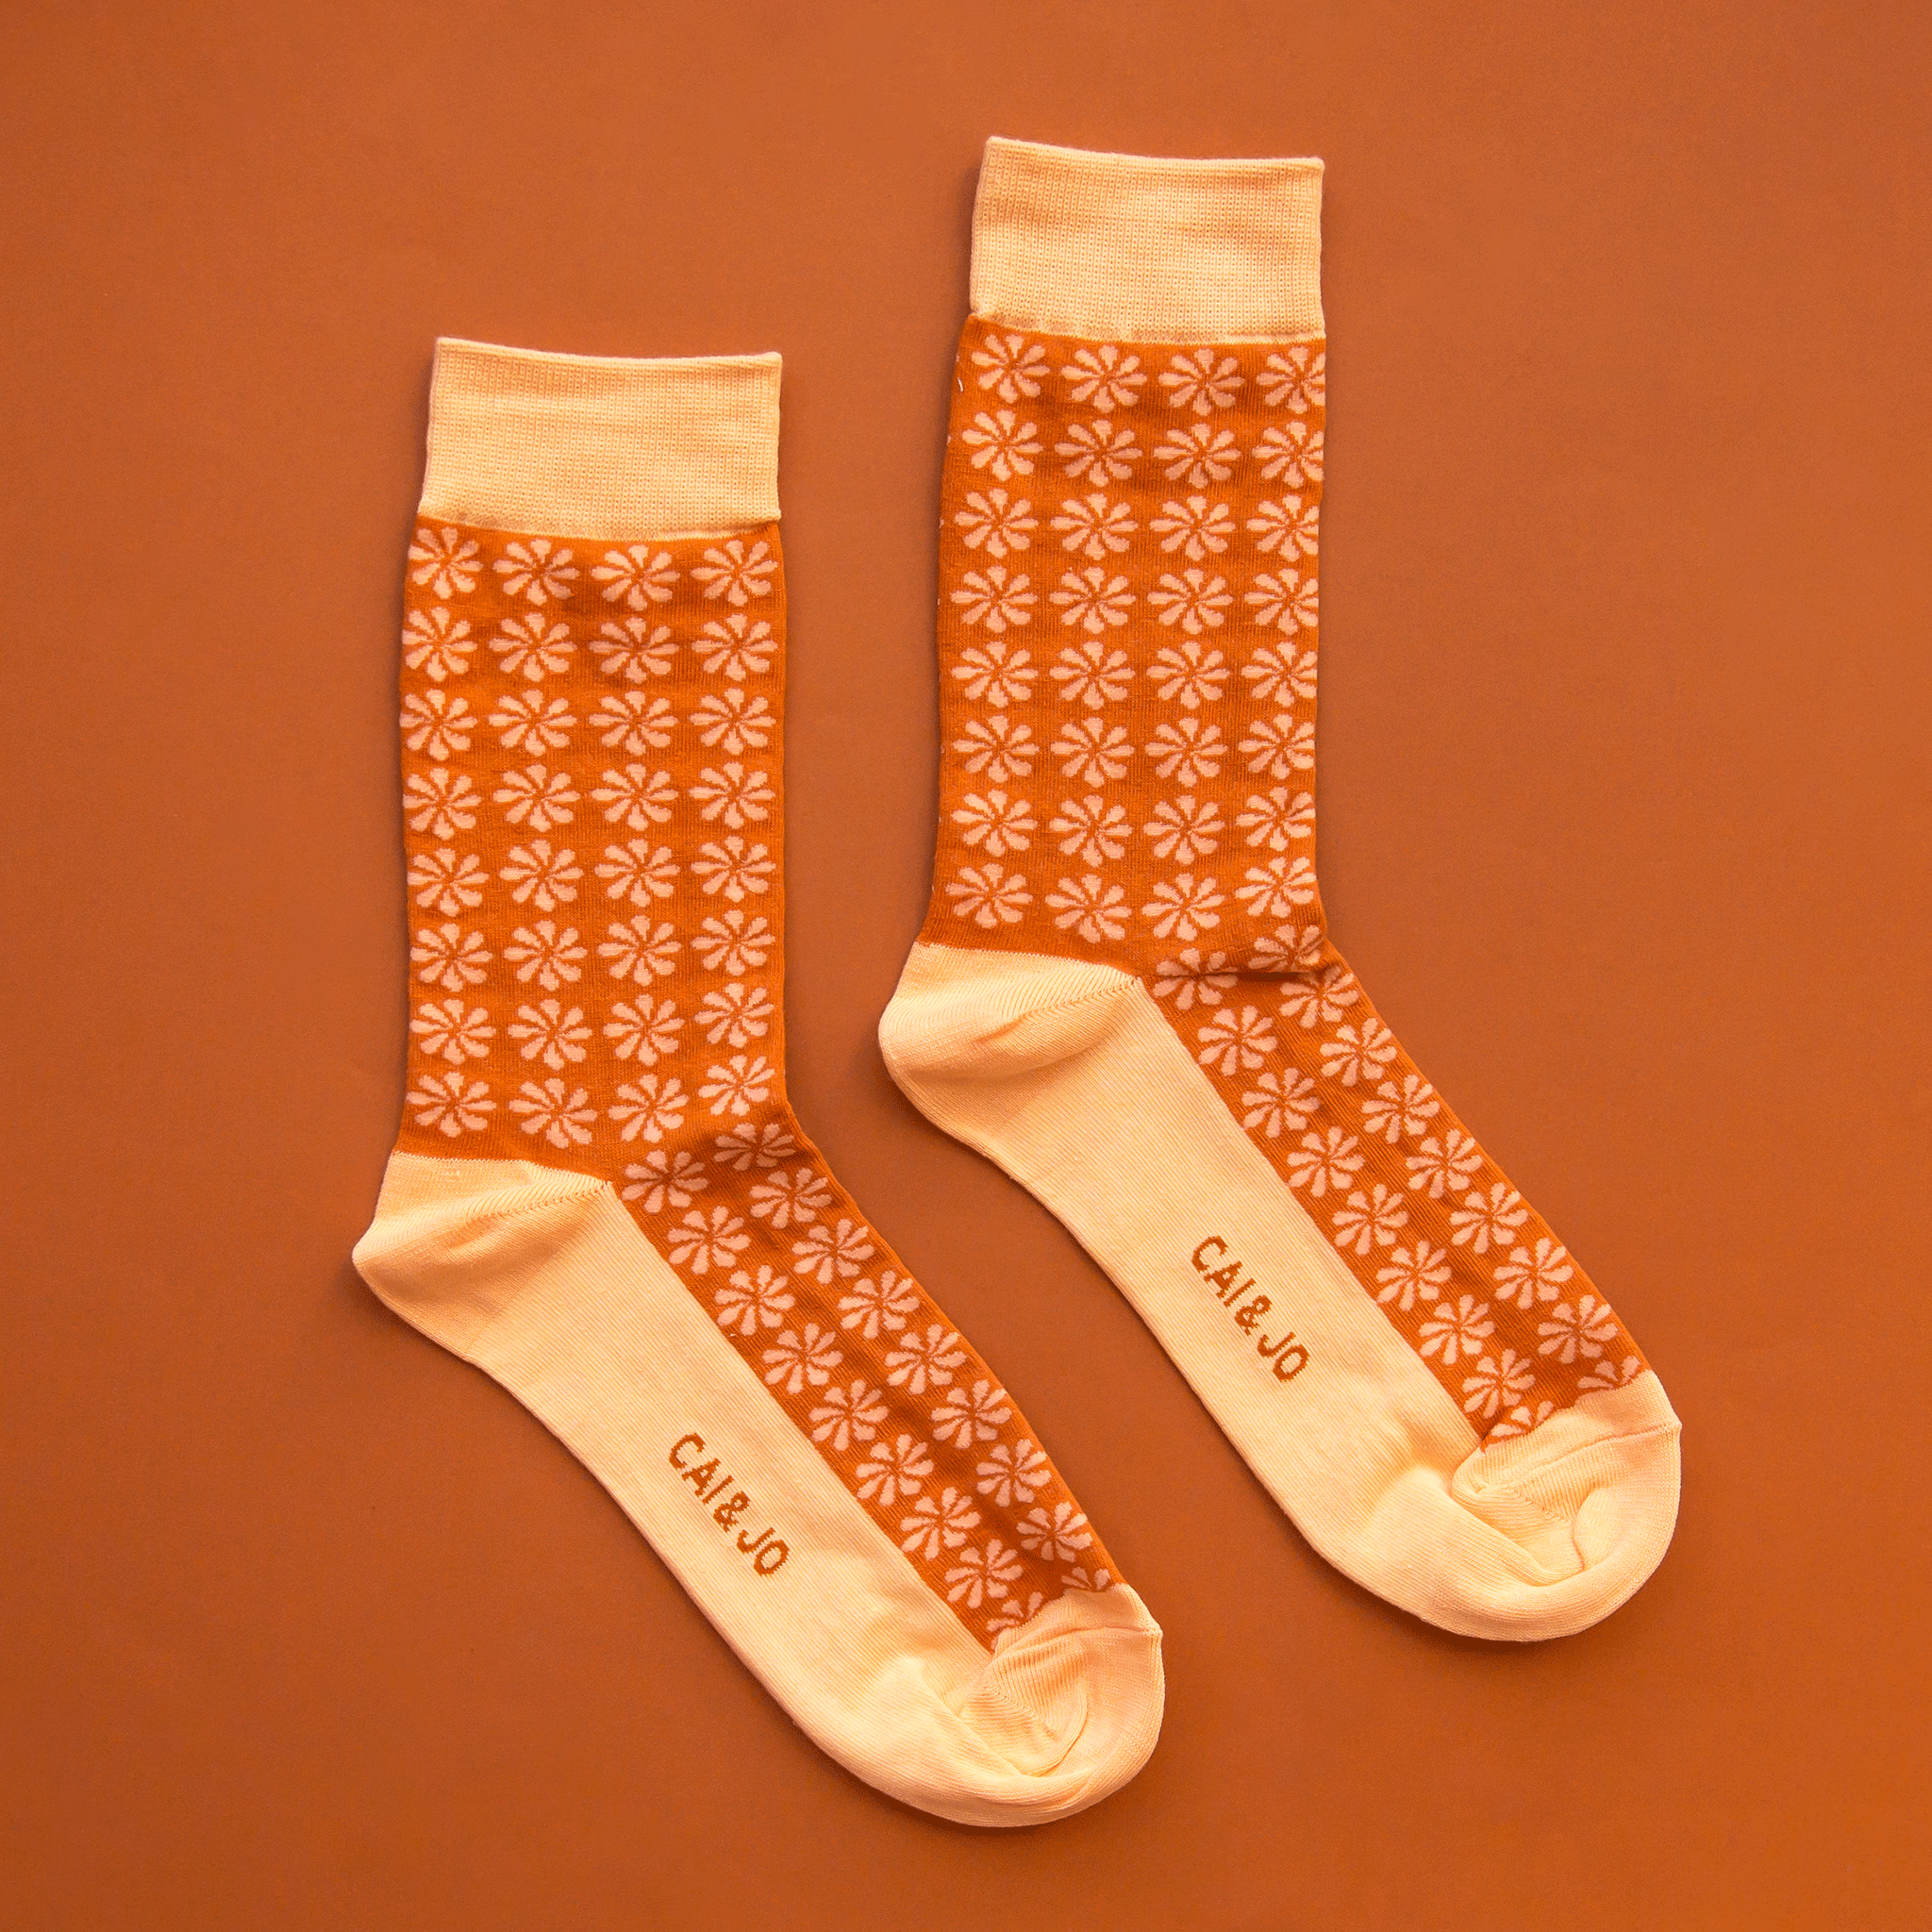 On an orange background is a pair of orange and light orange socks with a daisy print on them.